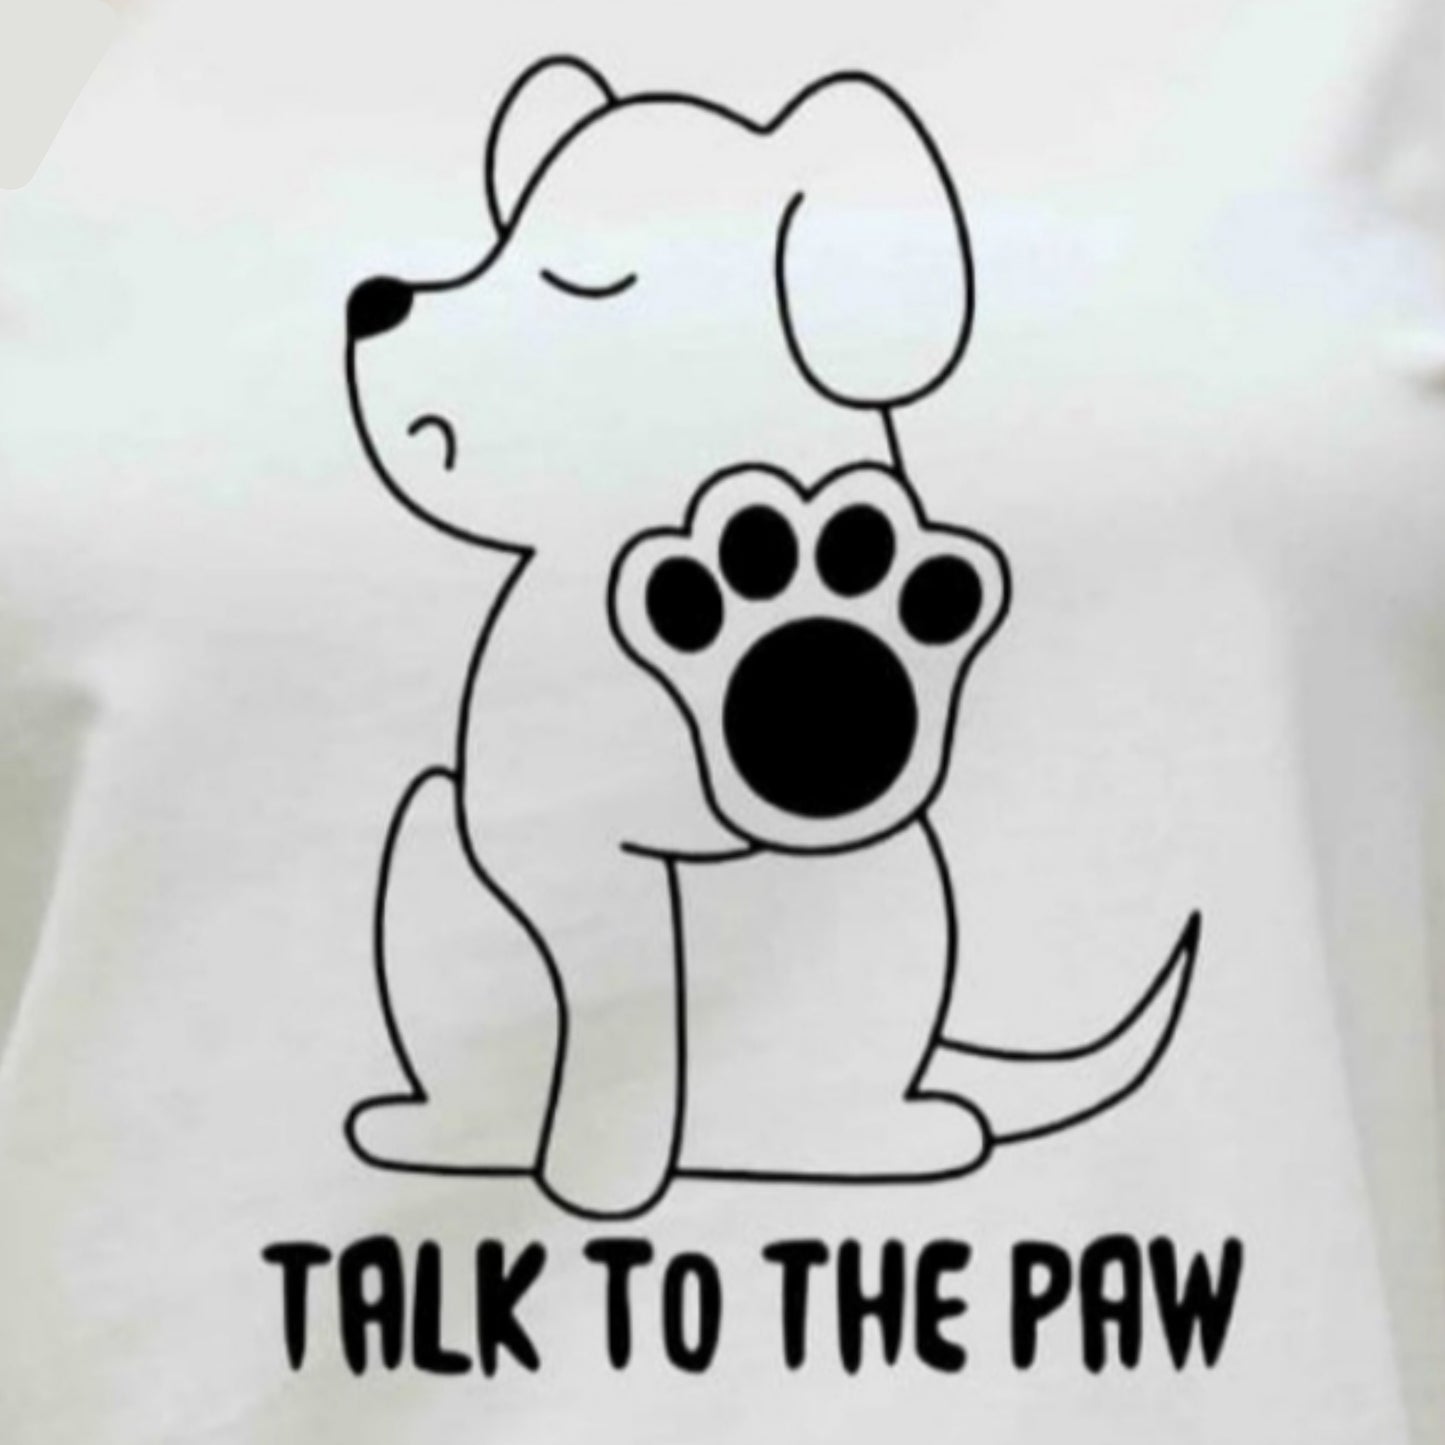 TALK TO THE PAW Dog Funny Graphic 100% Cotton Short Sleeve Tee Shirt (Plus Size Available)